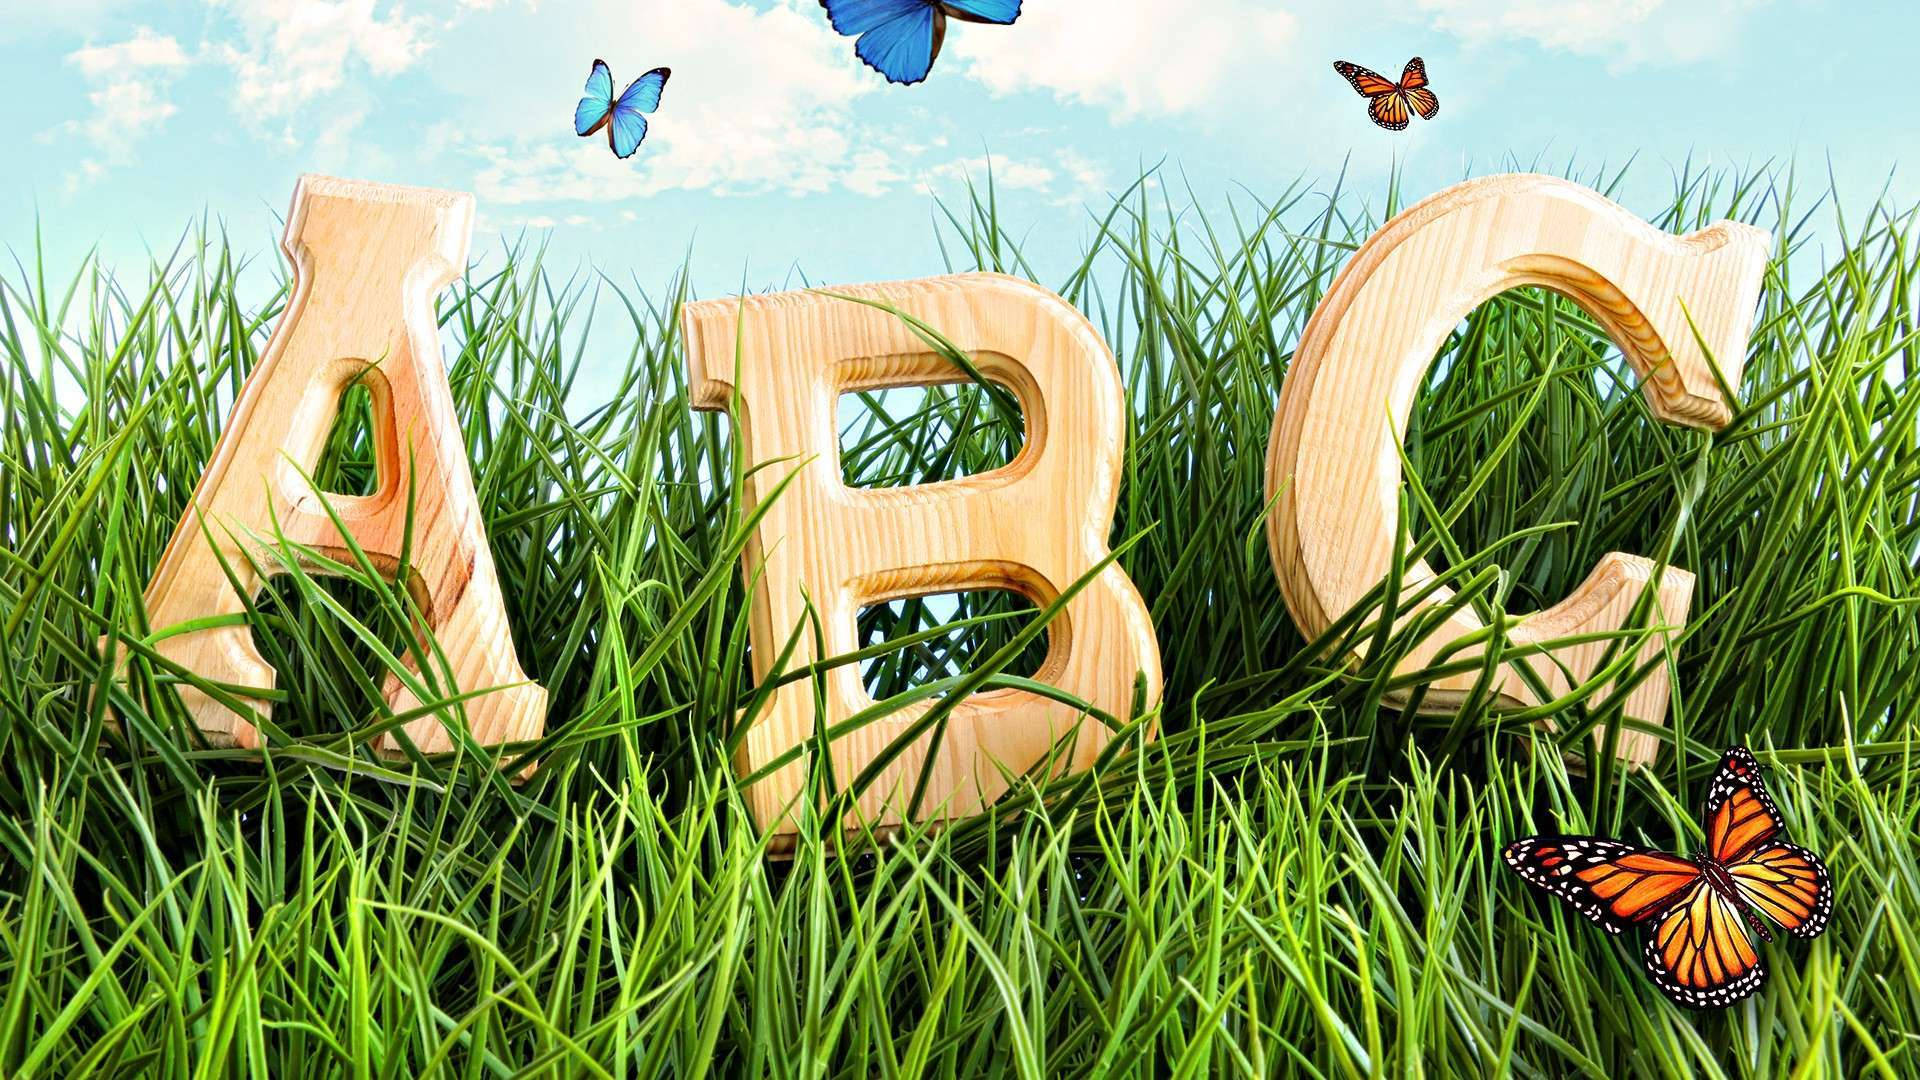 Abc Wooden Letters On Grass Wallpaper